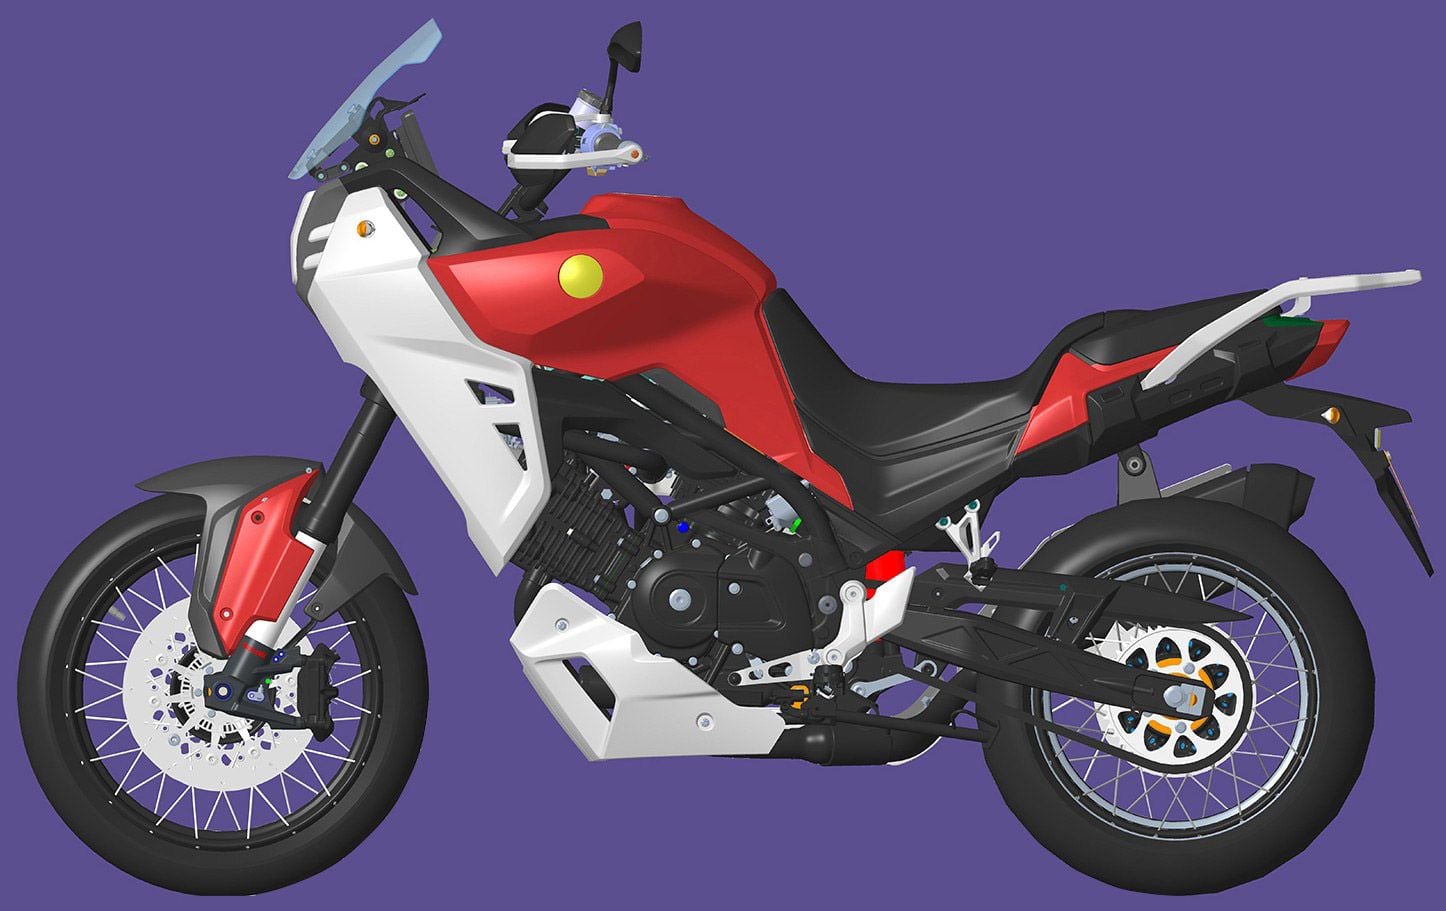 The 650cc V-twin breaks from Benelli’s usual parallel-twin layouts, and appears close in size to Suzuki’s SV650.